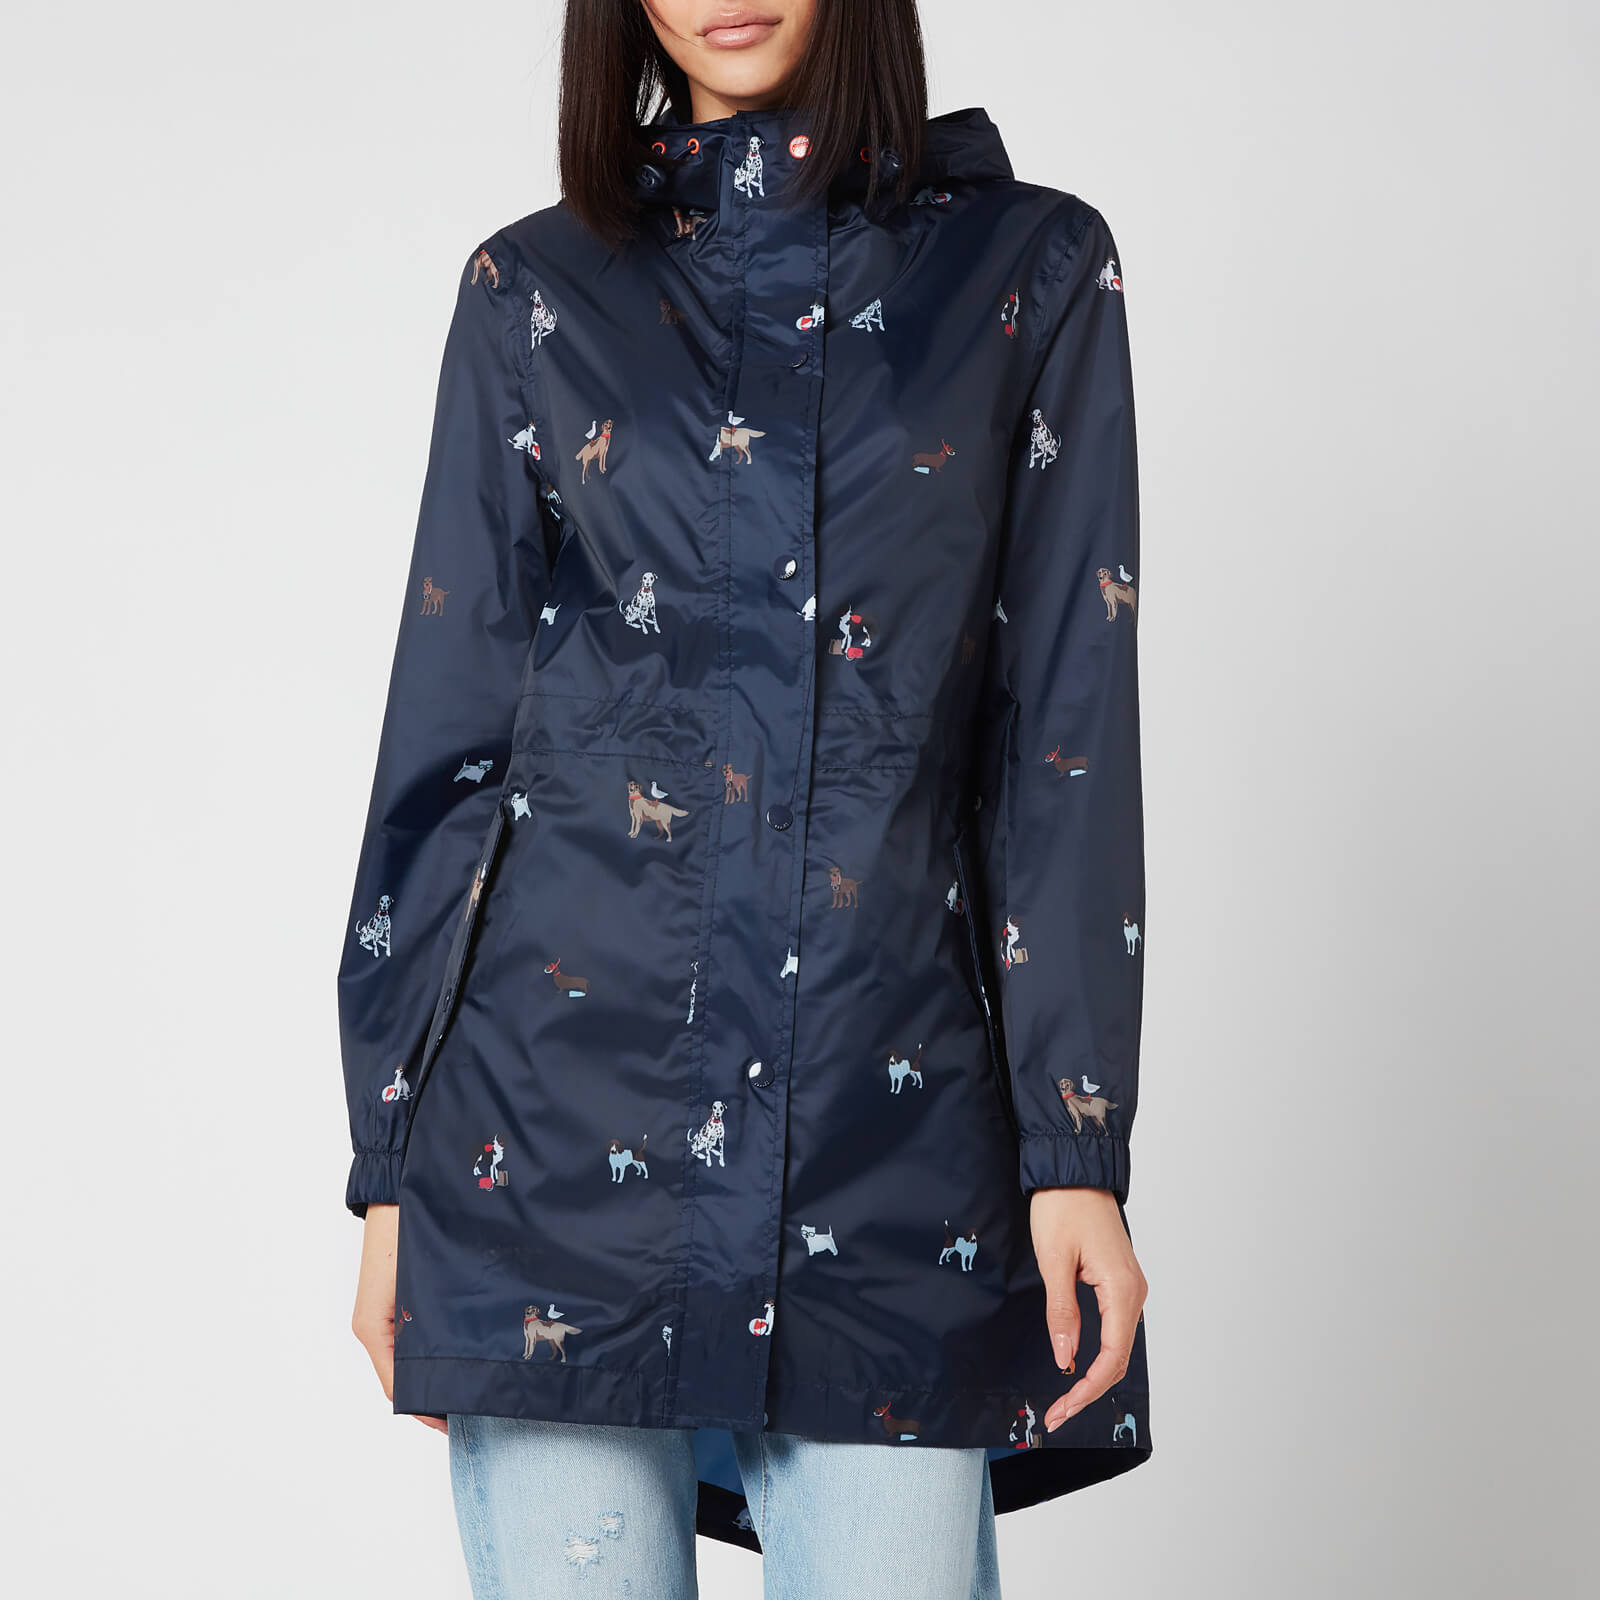 Joules Women's Golightly Packable Jacket - Navy Dog - UK 8